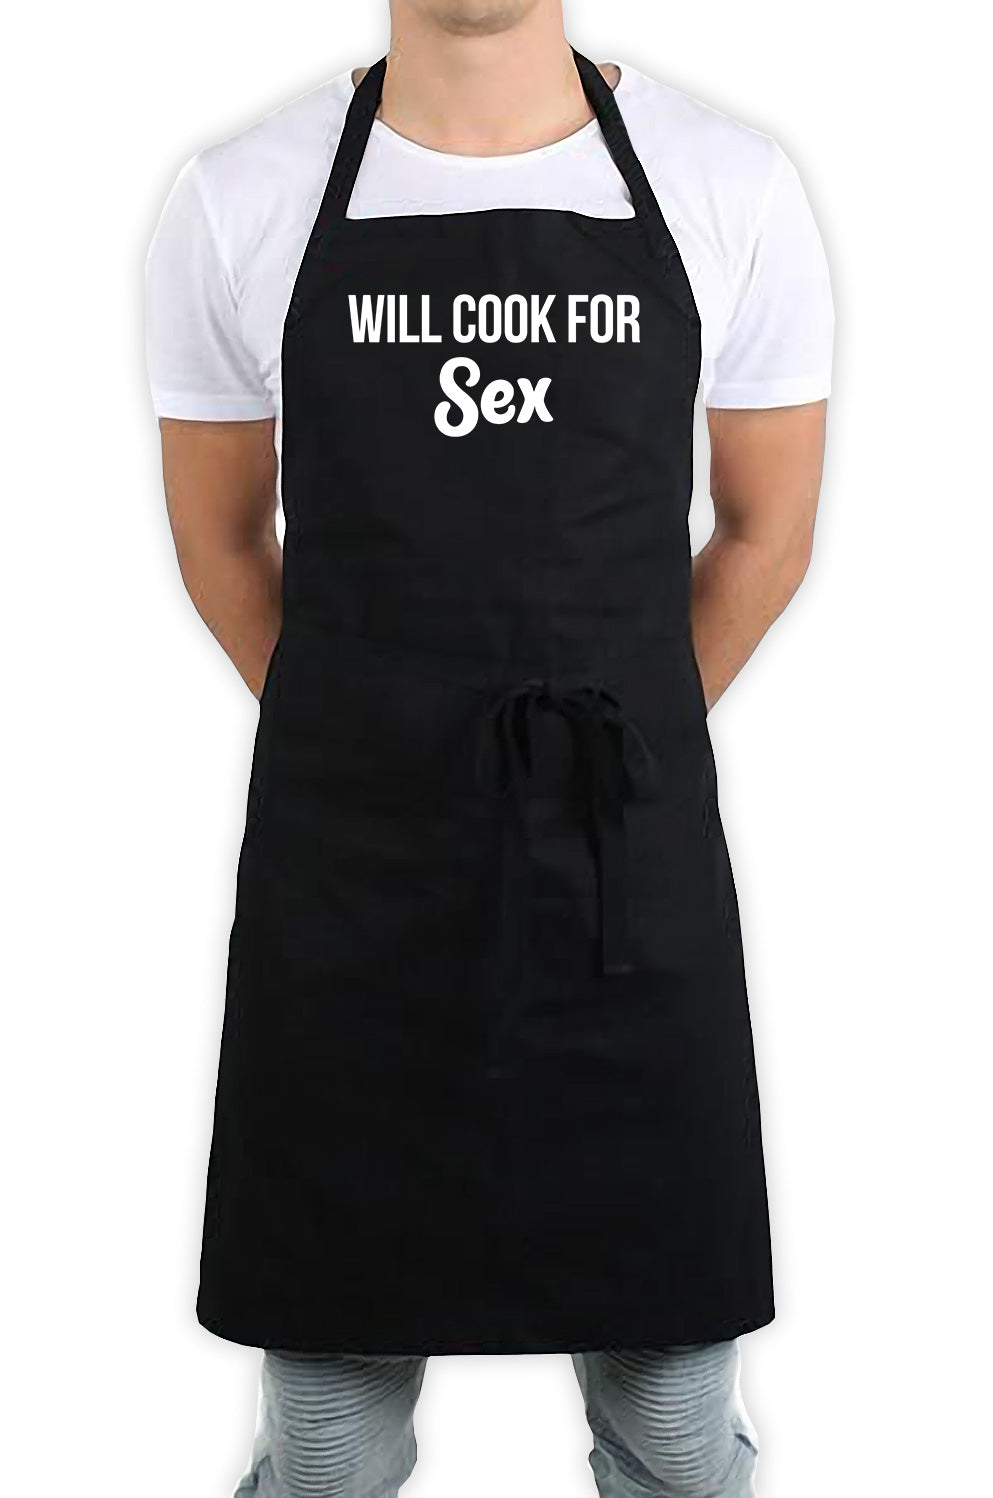 Will Cook For Sex Funny Kitchen BBQ Apron Black